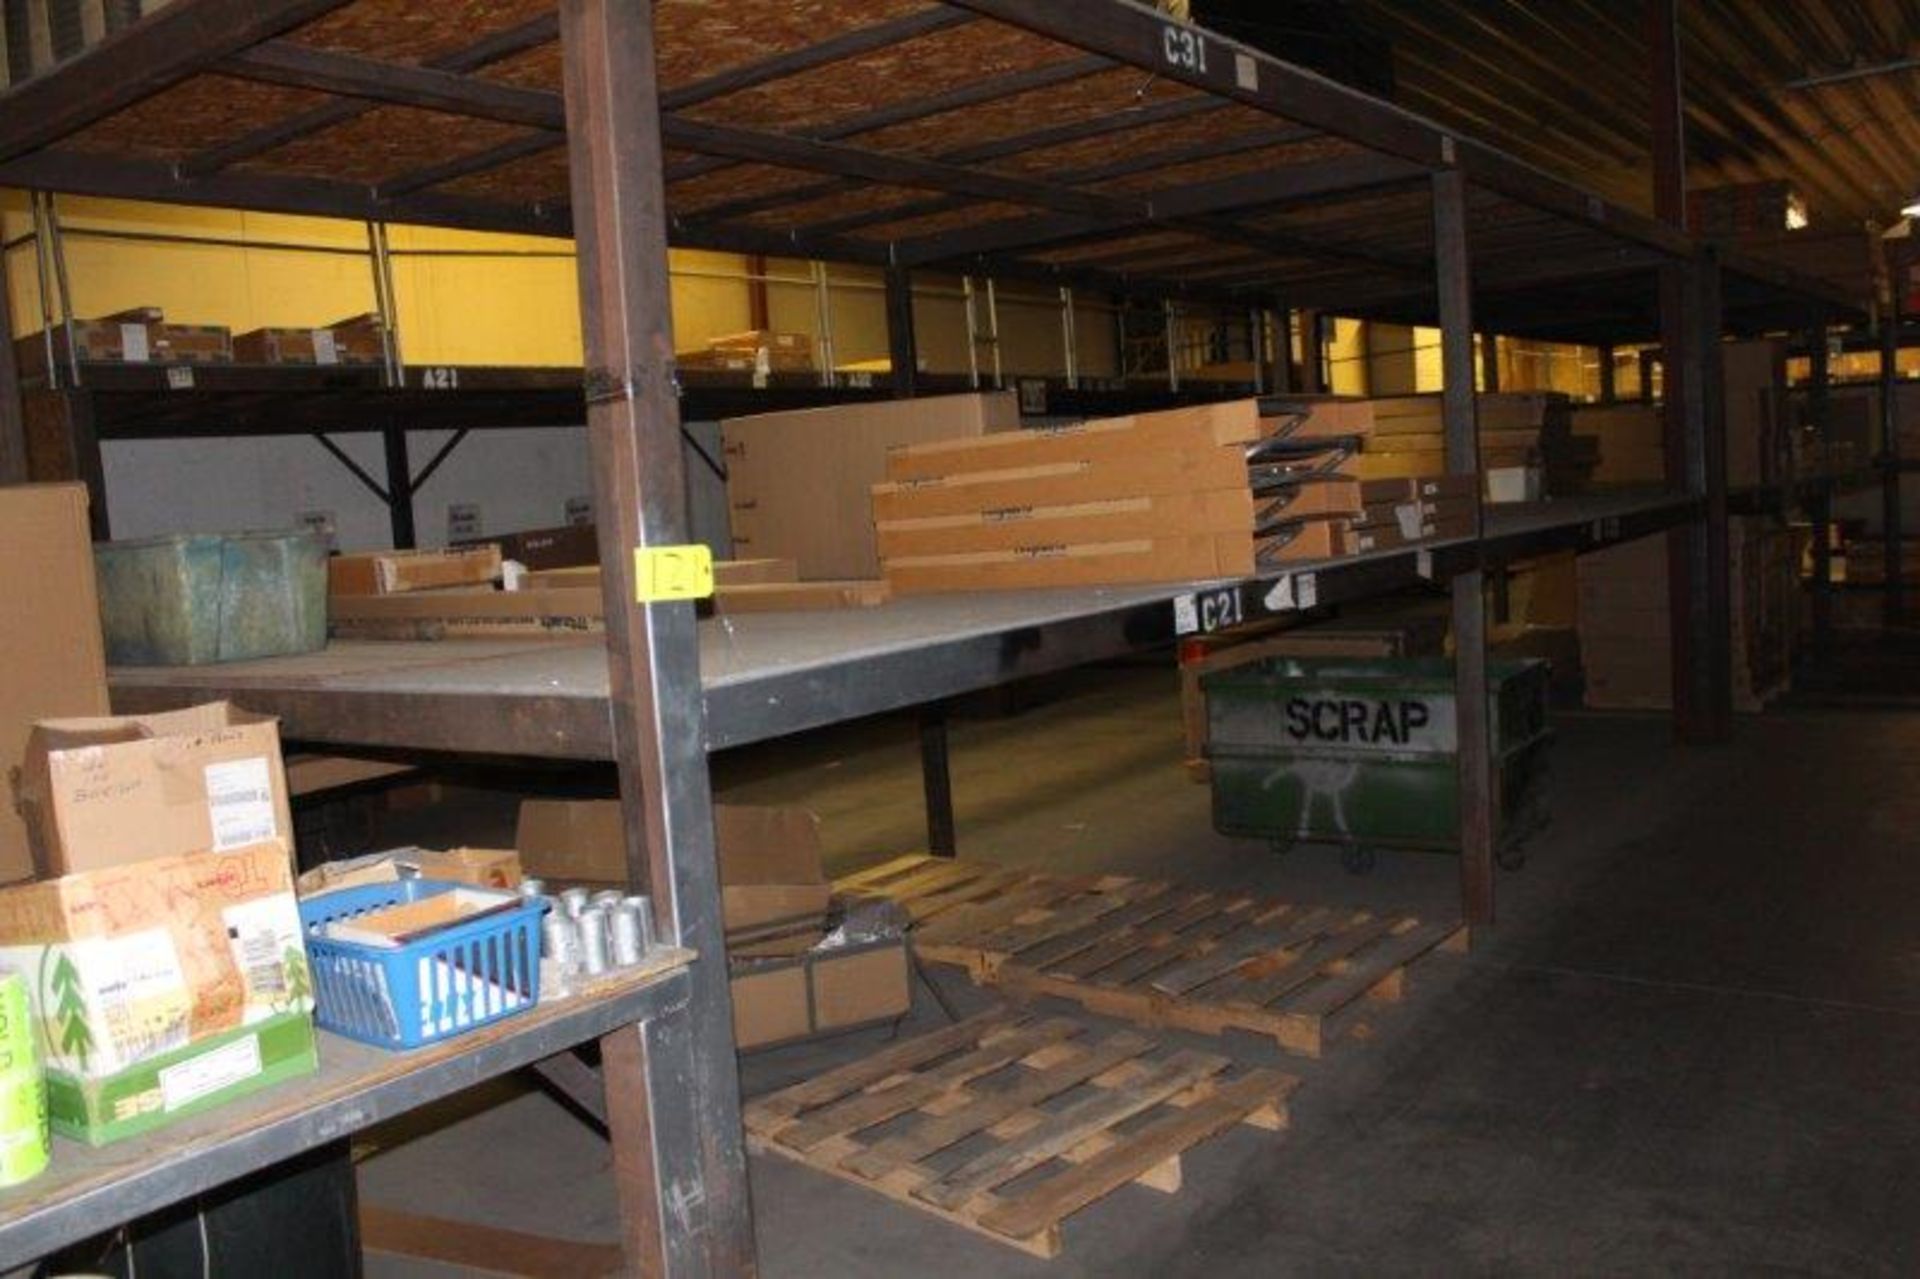 Lot of 2) Sections Fabricated Steel Racking, (Inventory Not Included)